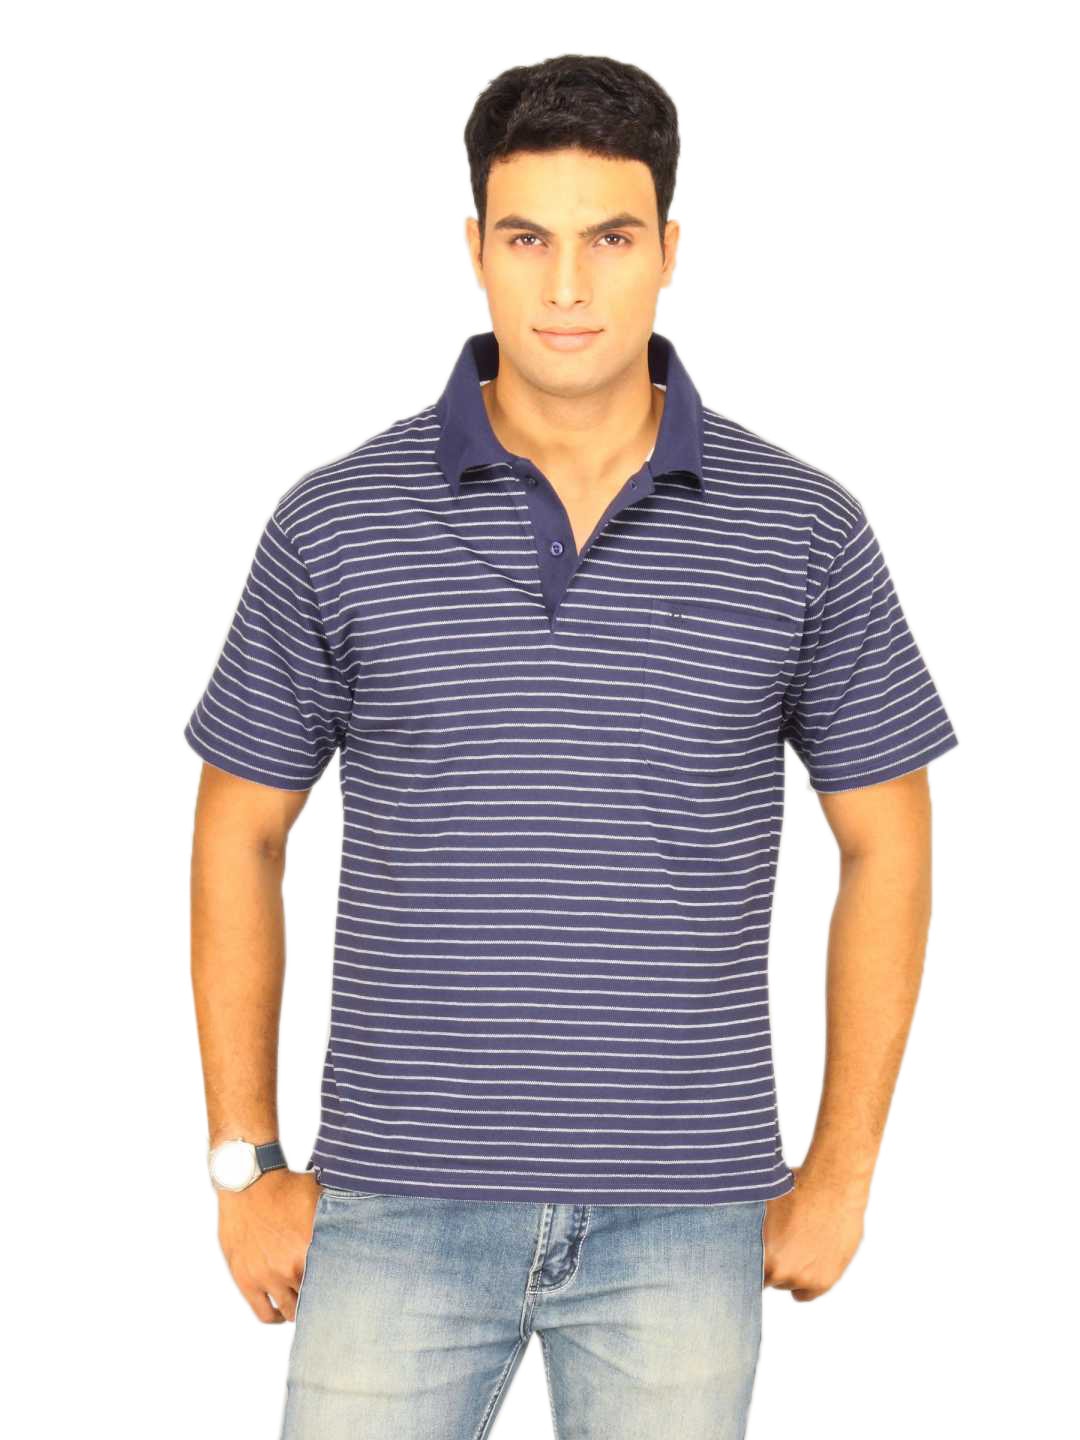 Classic Polo Men's Navy With White Stripes T-shirt